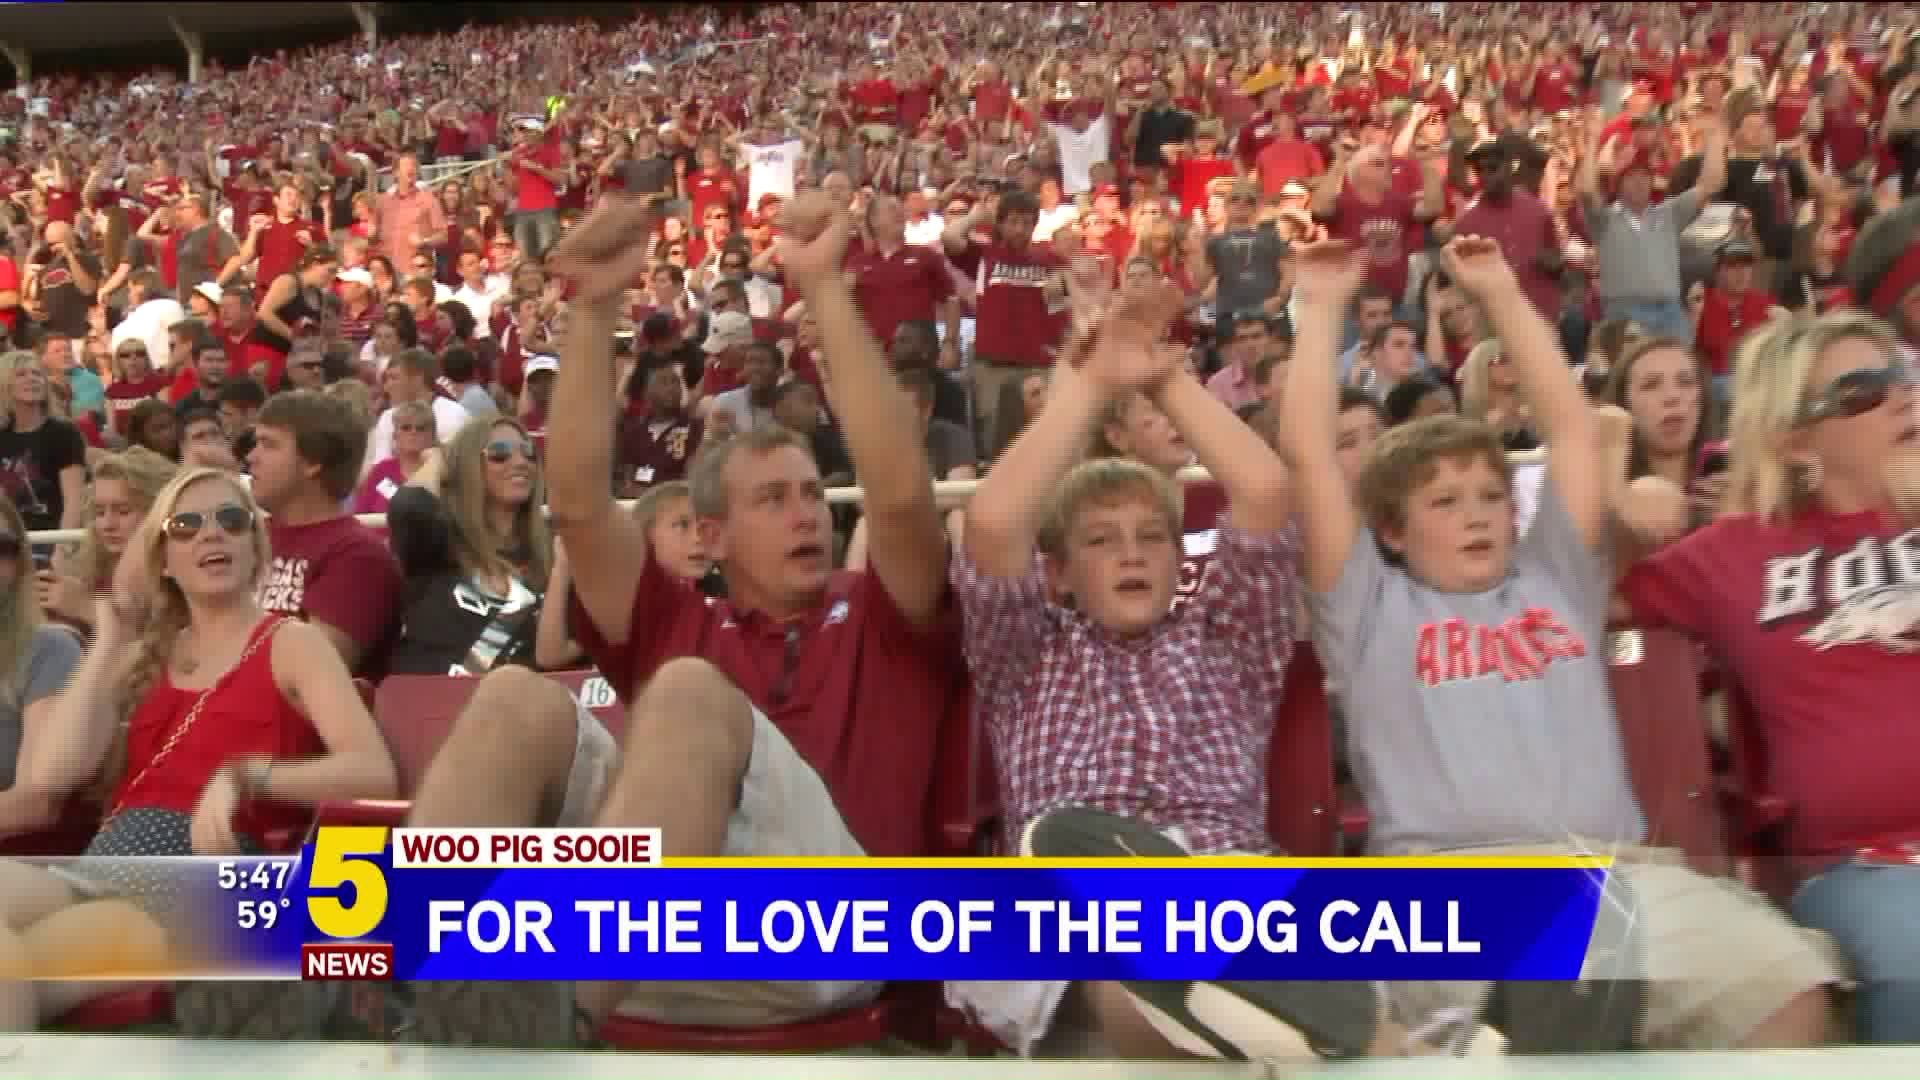 For The Love of the Hog Call